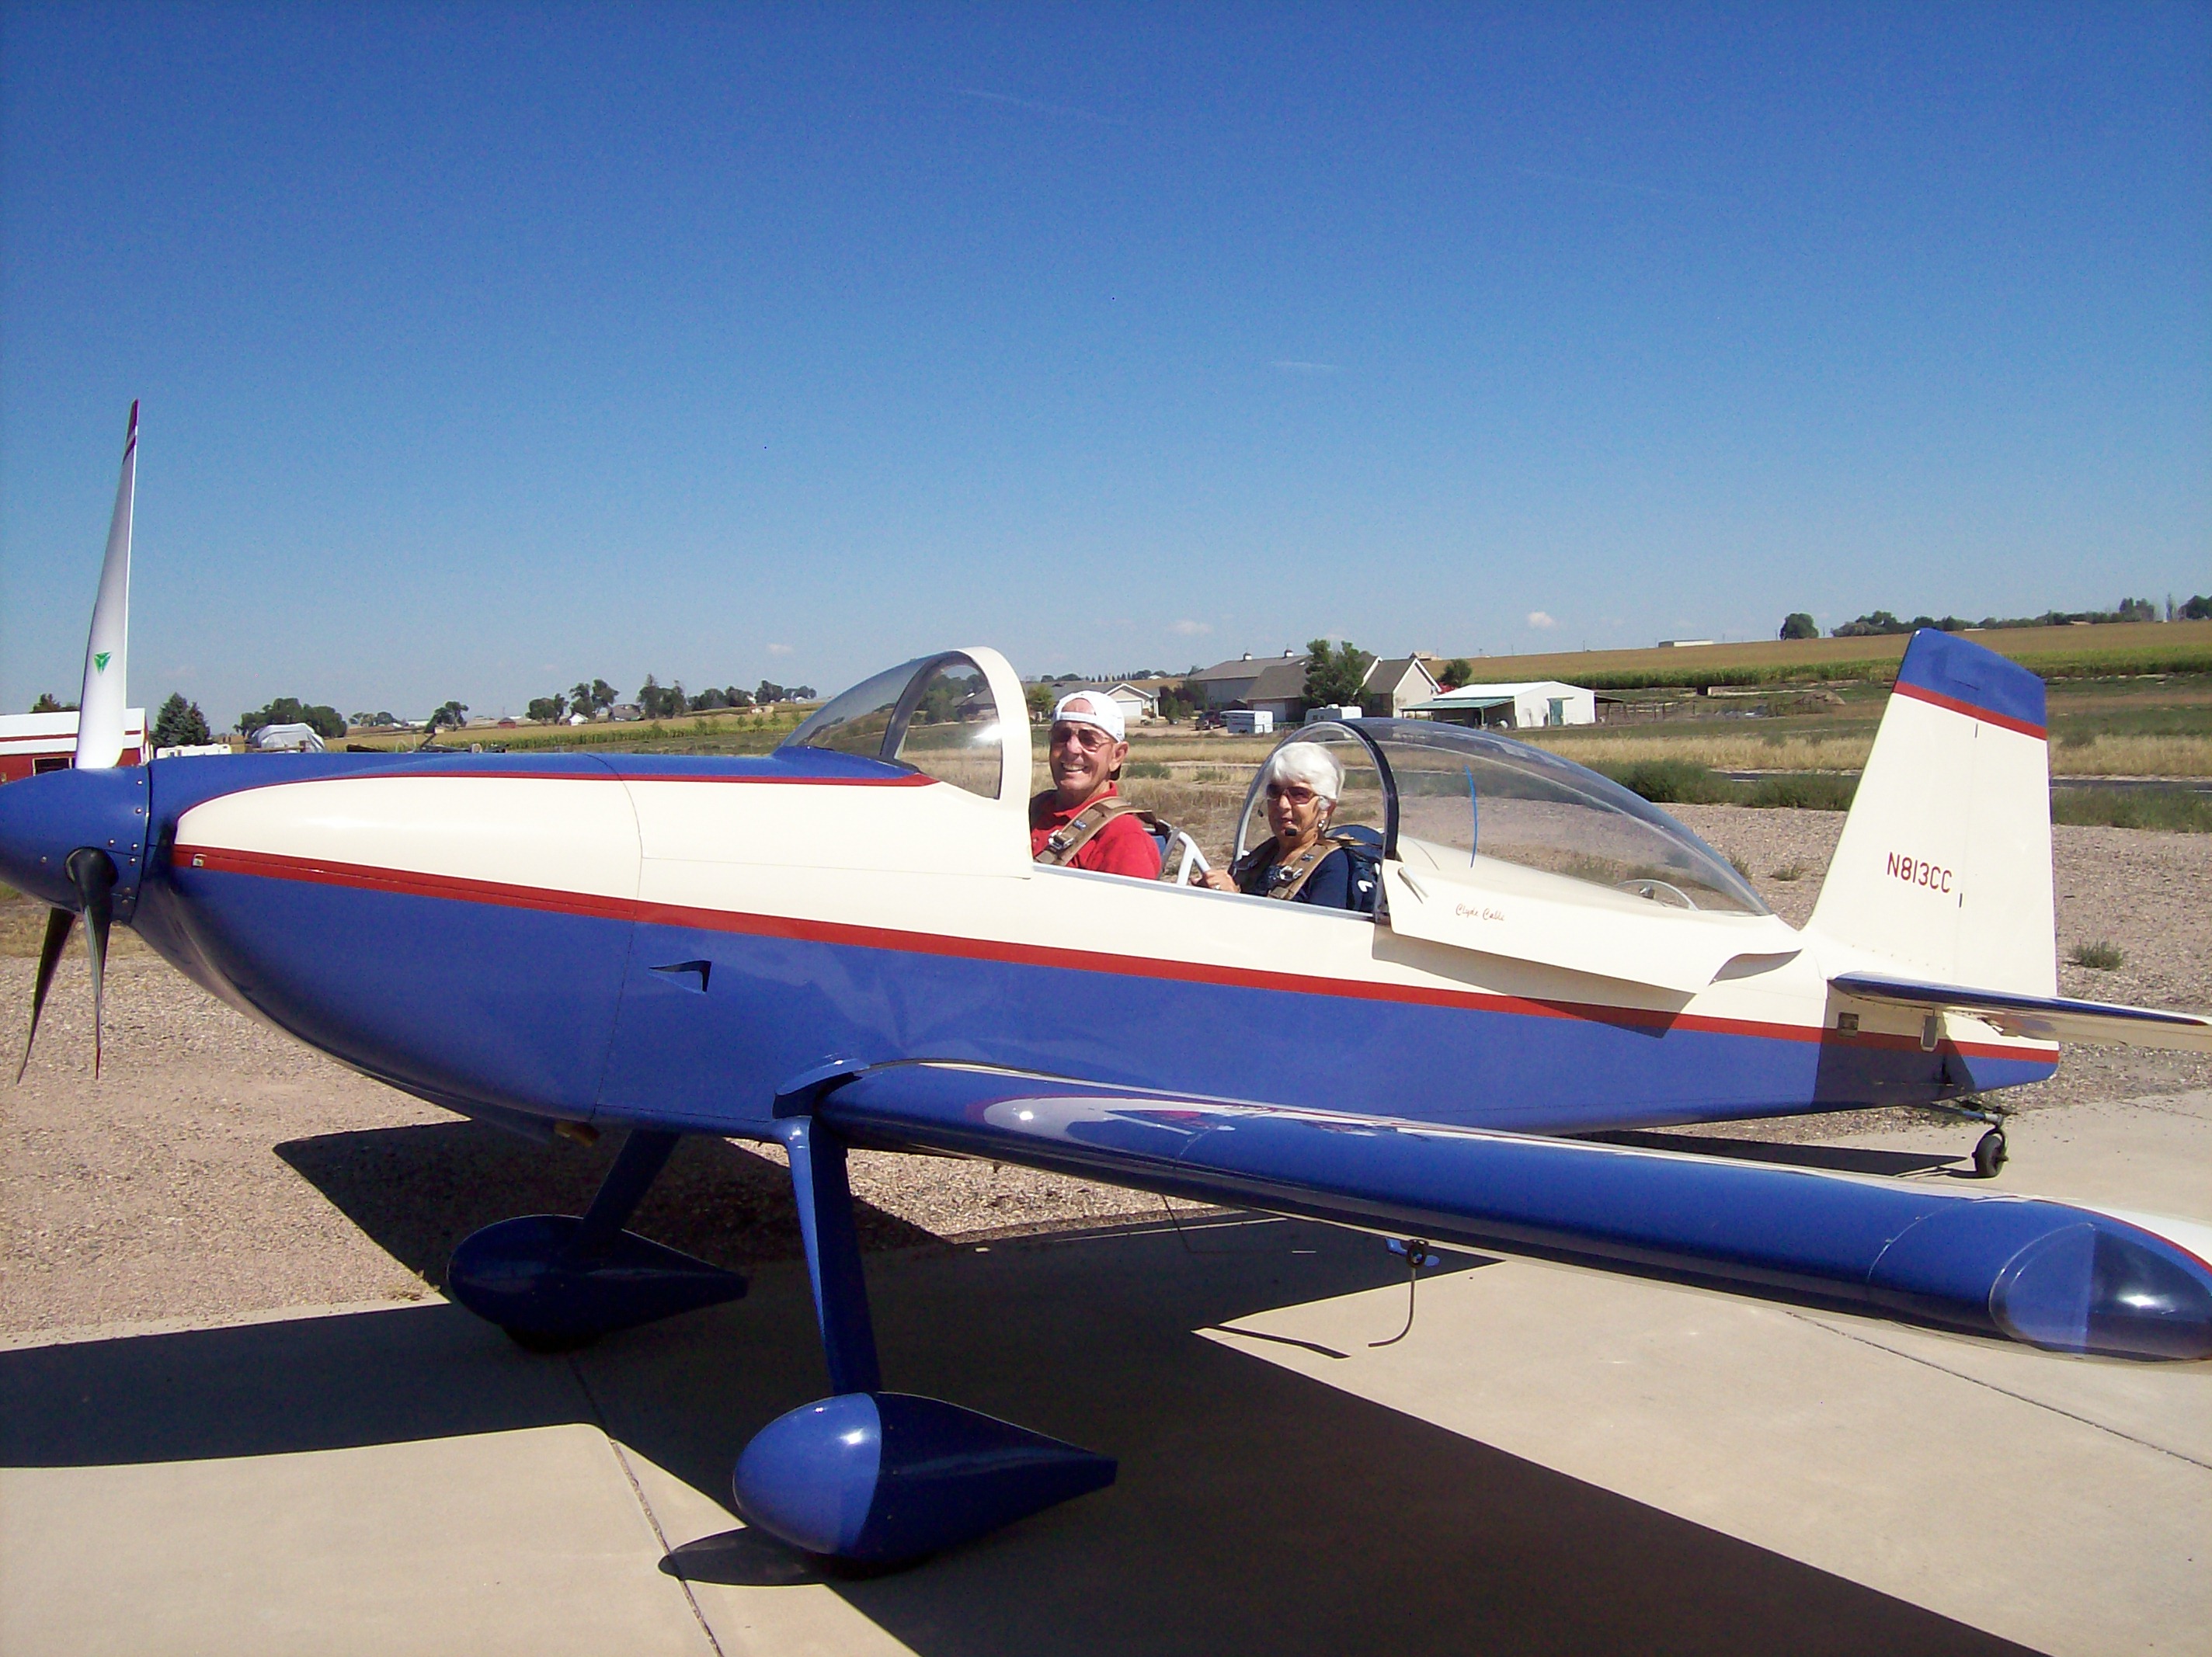 Clyde & Jinny in their RV-8